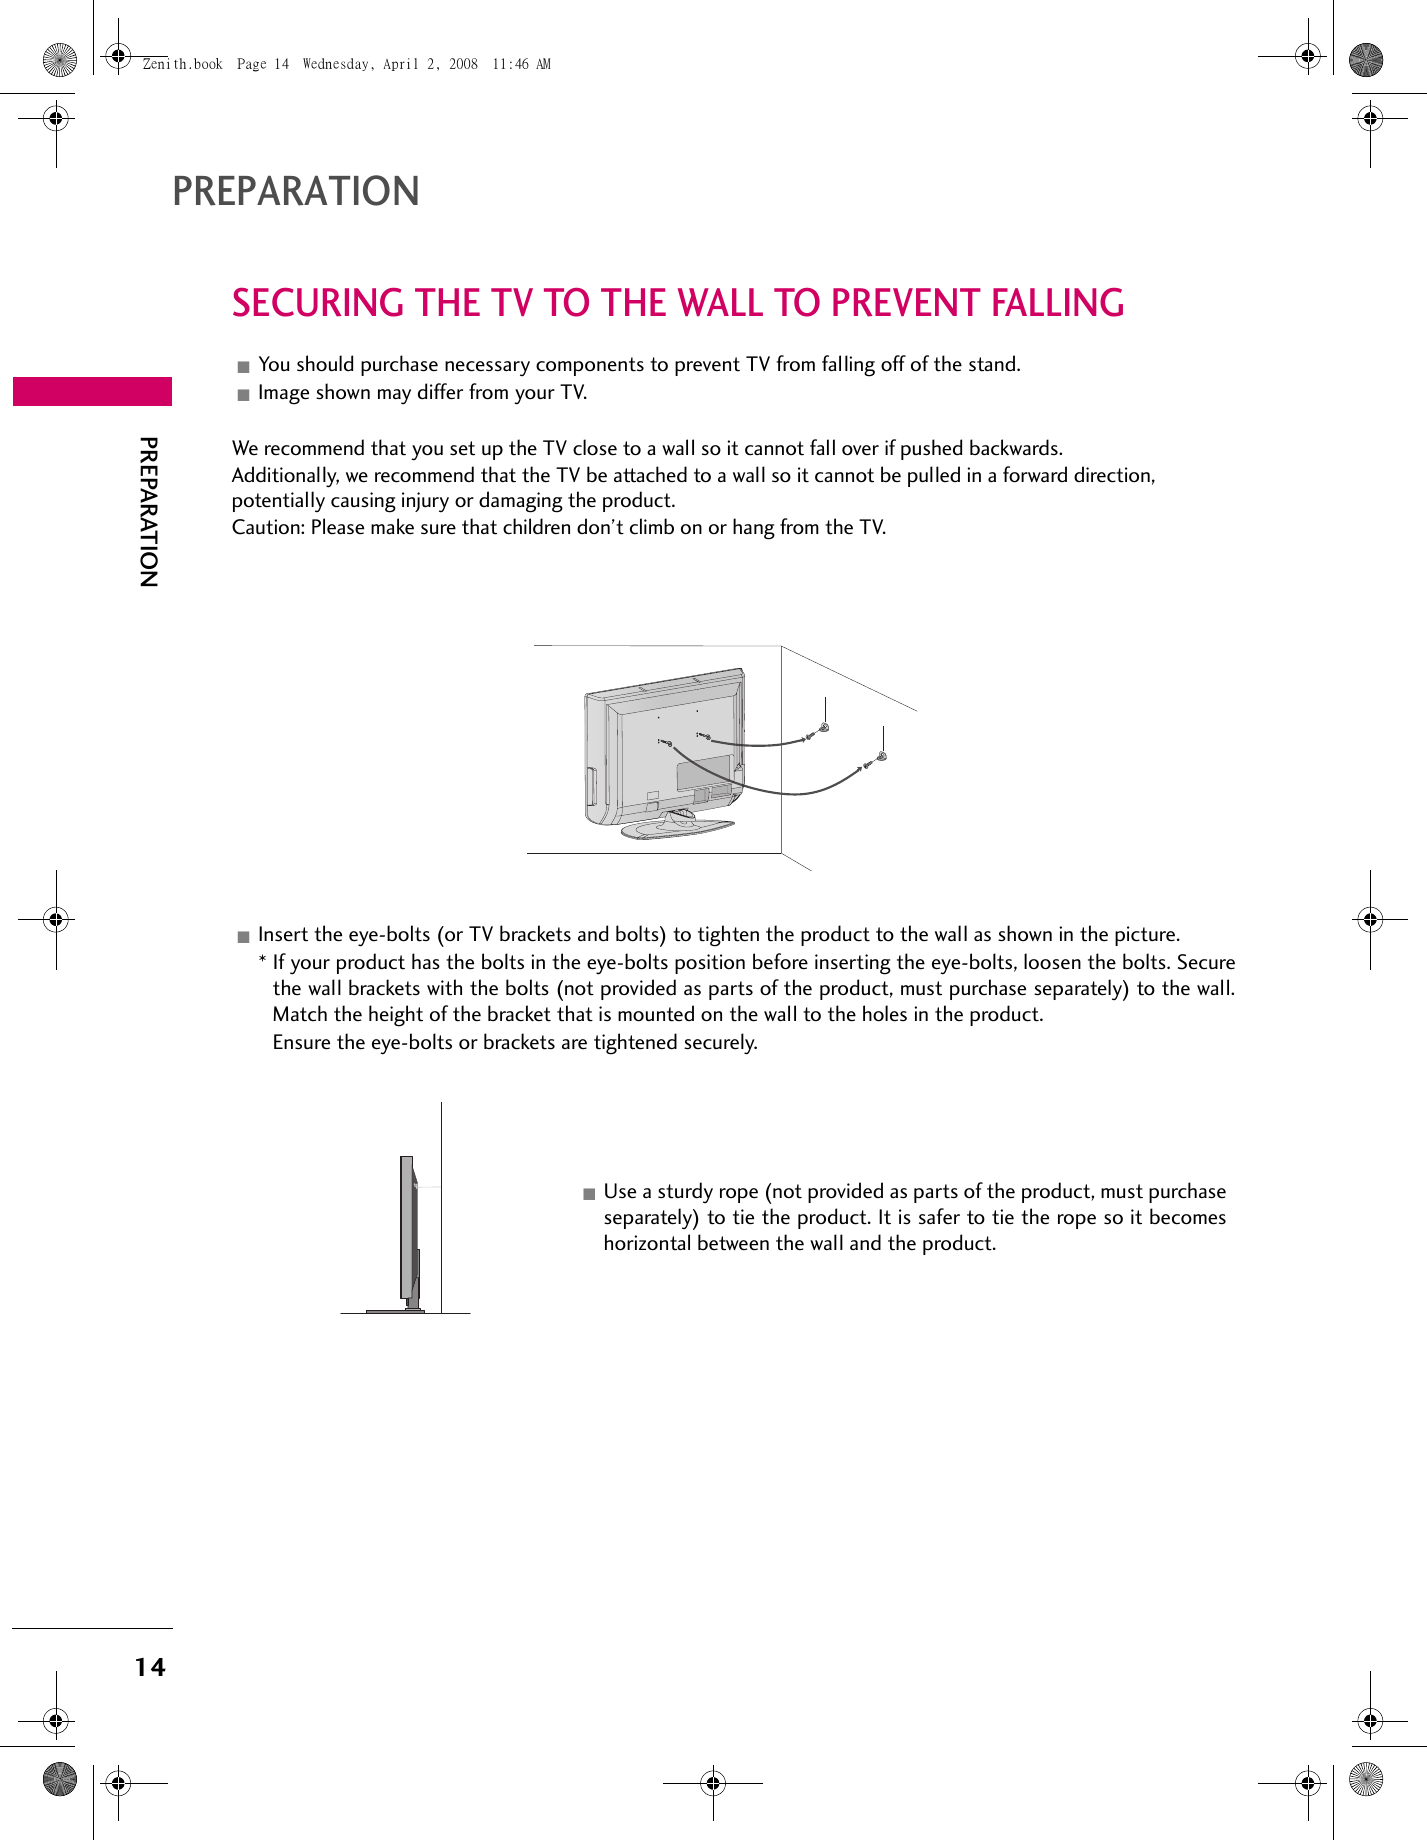 14PREPARATIONPREPARATIONSECURING THE TV TO THE WALL TO PREVENT FALLINGYou should purchase necessary components to prevent TV from falling off of the stand.Image shown may differ from your TV.We recommend that you set up the TV close to a wall so it cannot fall over if pushed backwards.Additionally, we recommend that the TV be attached to a wall so it cannot be pulled in a forward direction, potentially causing injury or damaging the product.Caution: Please make sure that children don’t climb on or hang from the TV.Insert the eye-bolts (or TV brackets and bolts) to tighten the product to the wall as shown in the picture. * If your product has the bolts in the eye-bolts position before inserting the eye-bolts, loosen the bolts. Securethe wall brackets with the bolts (not provided as parts of the product, must purchase separately) to the wall.Match the height of the bracket that is mounted on the wall to the holes in the product. Ensure the eye-bolts or brackets are tightened securely.Use a sturdy rope (not provided as parts of the product, must purchaseseparately) to tie the product. It is safer to tie the rope so it becomeshorizontal between the wall and the product.Zenith.book  Page 14  Wednesday, April 2, 2008  11:46 AM